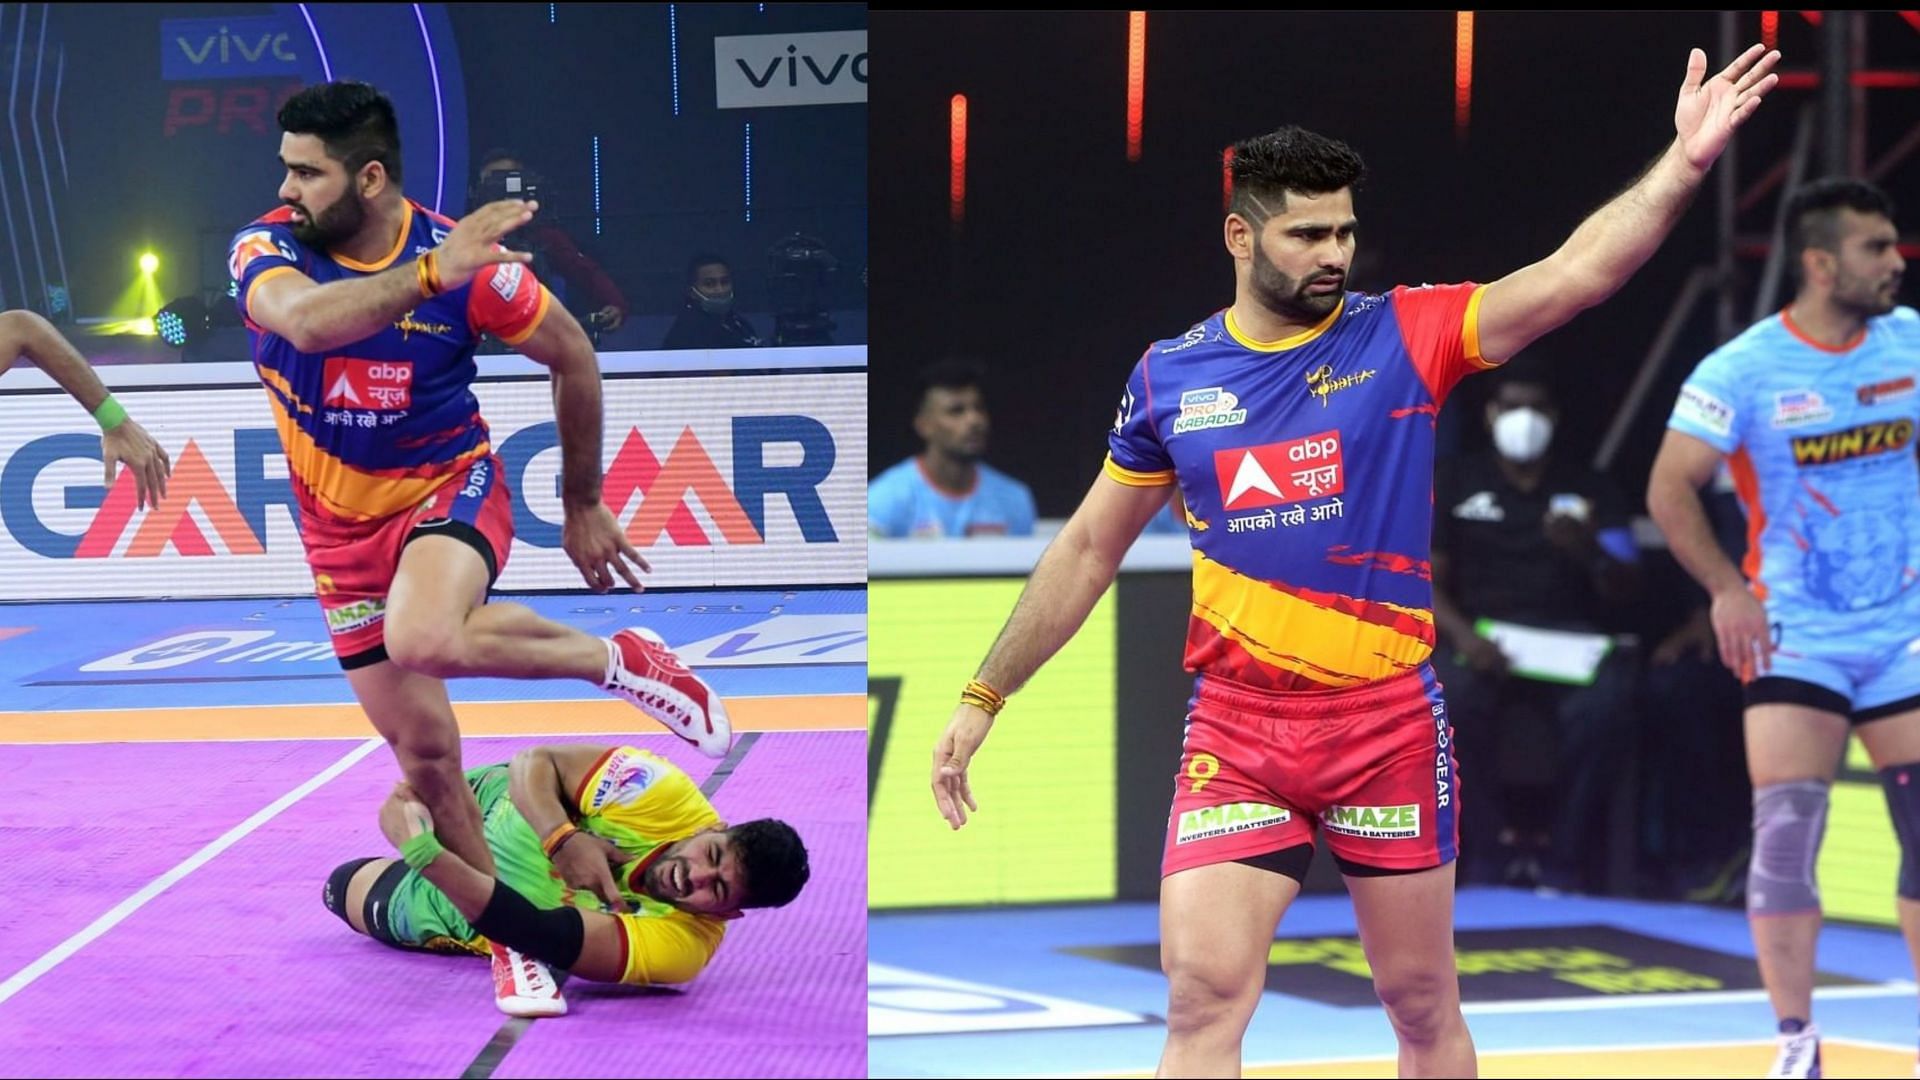 Pardeep Narwal has not been in his best form in Pro Kabaddi 2021 so far. (Image: UP Yoddha/Instagram)